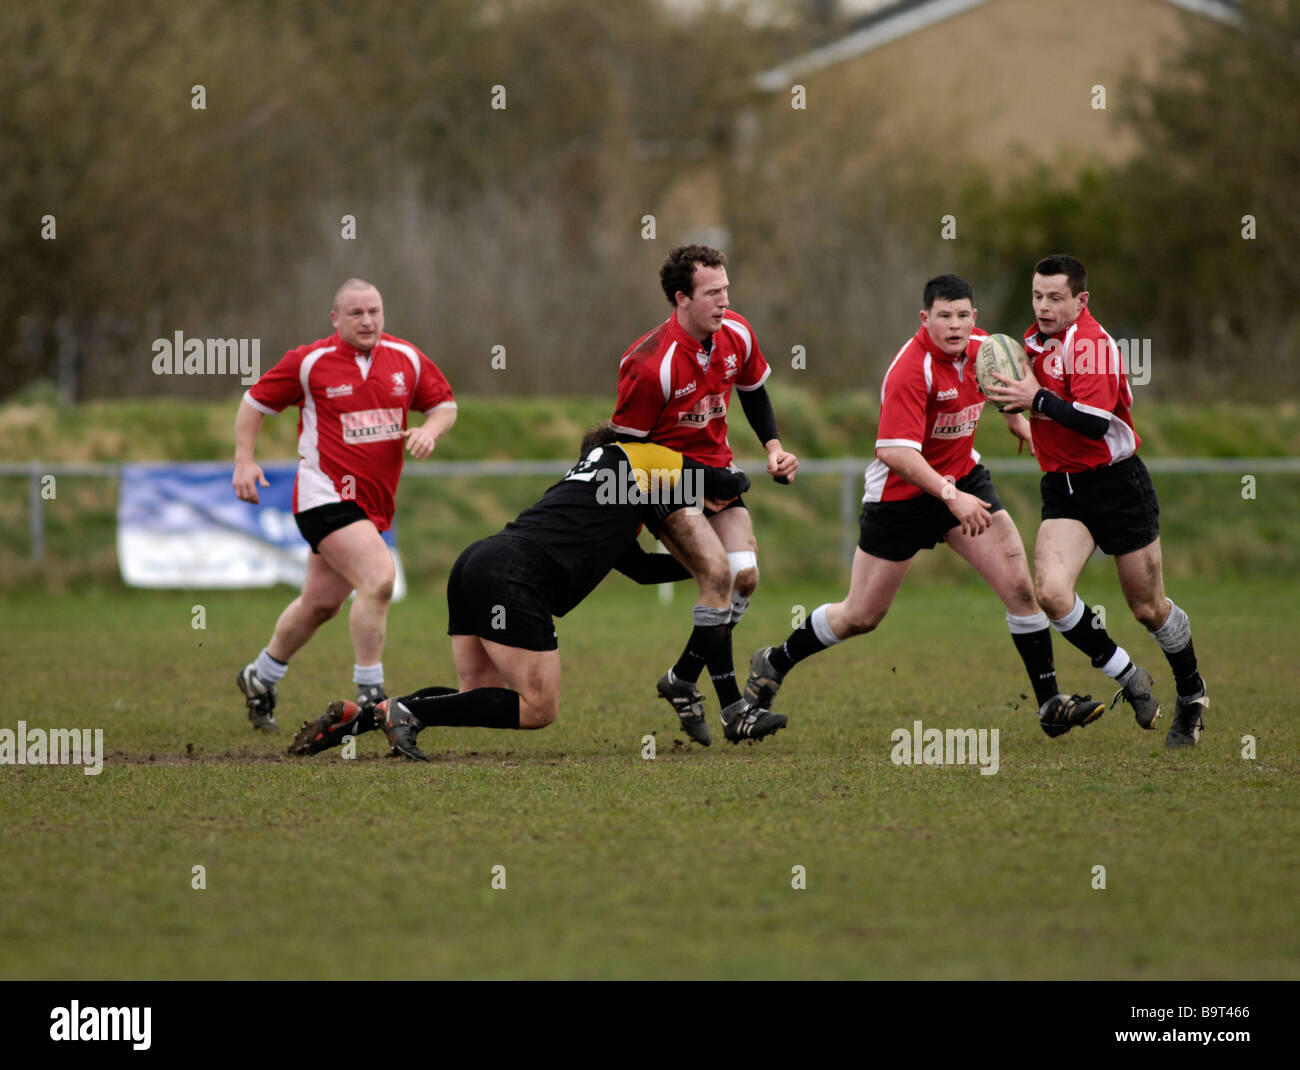 rugby player being tackled Stock Photo